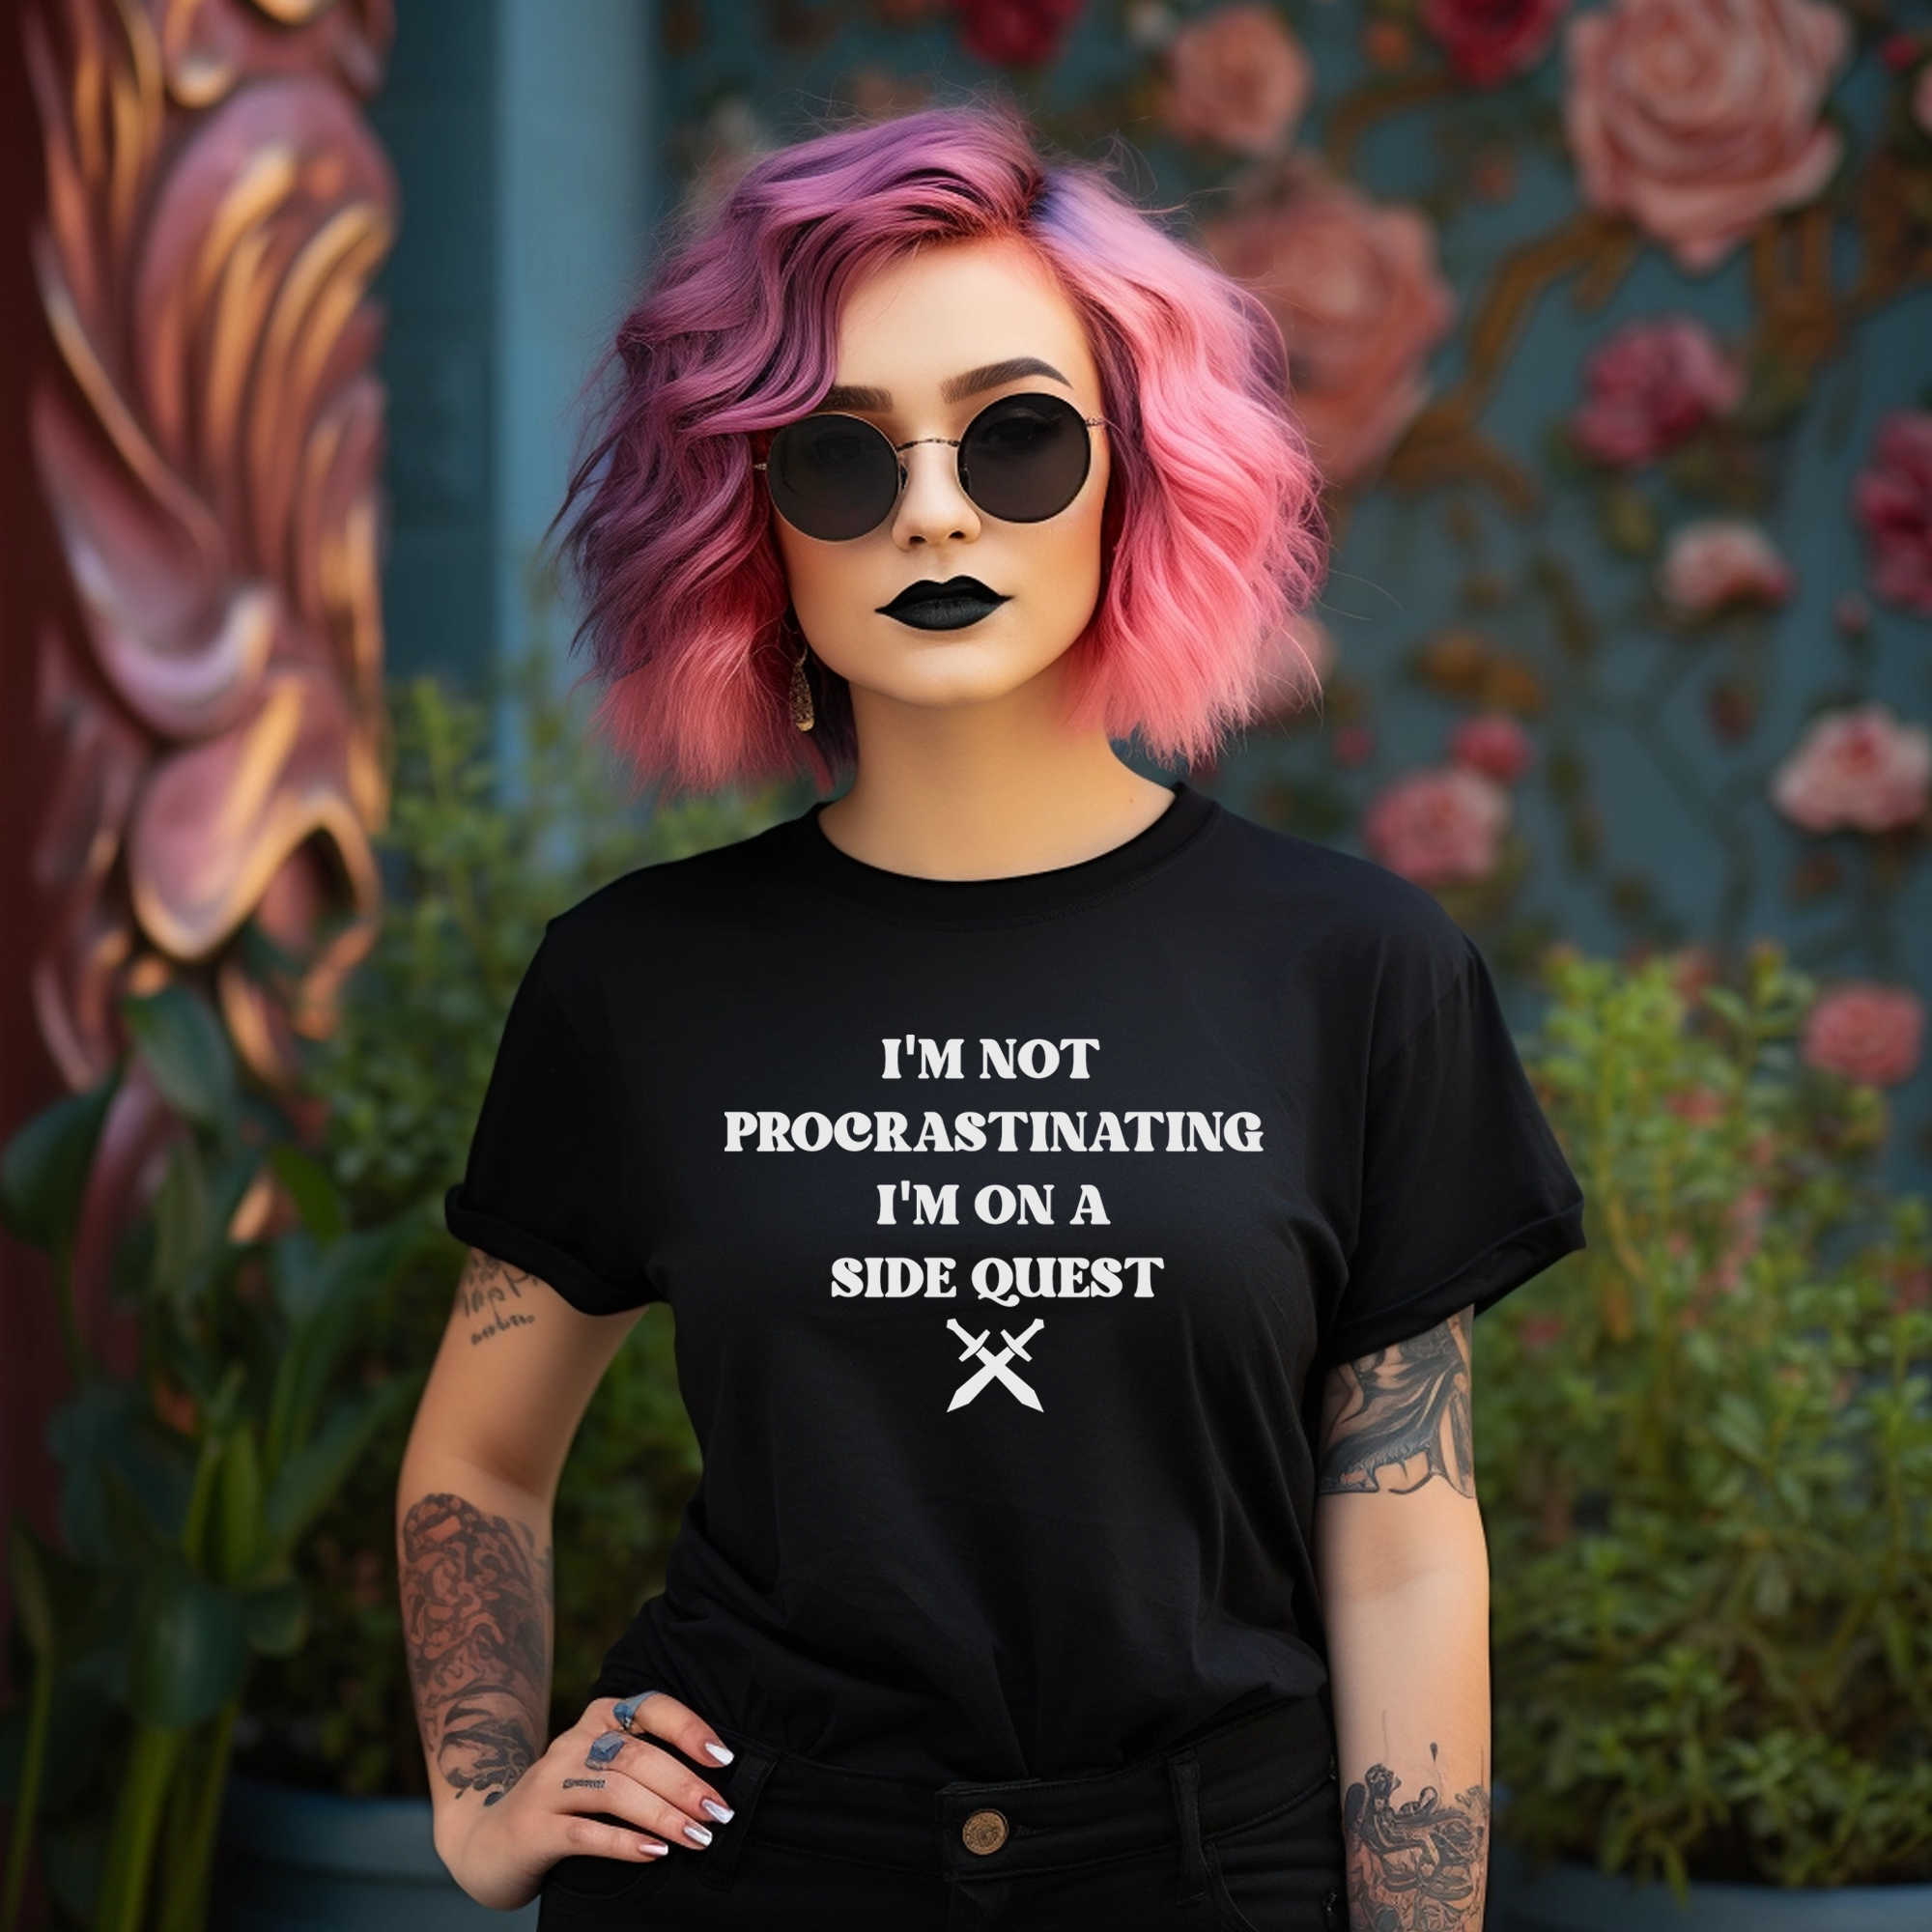 I'm Not Procrastinating I'm On A Side Quest T-Shirt  |  Gift for Gamers  |  Gamer Shirt